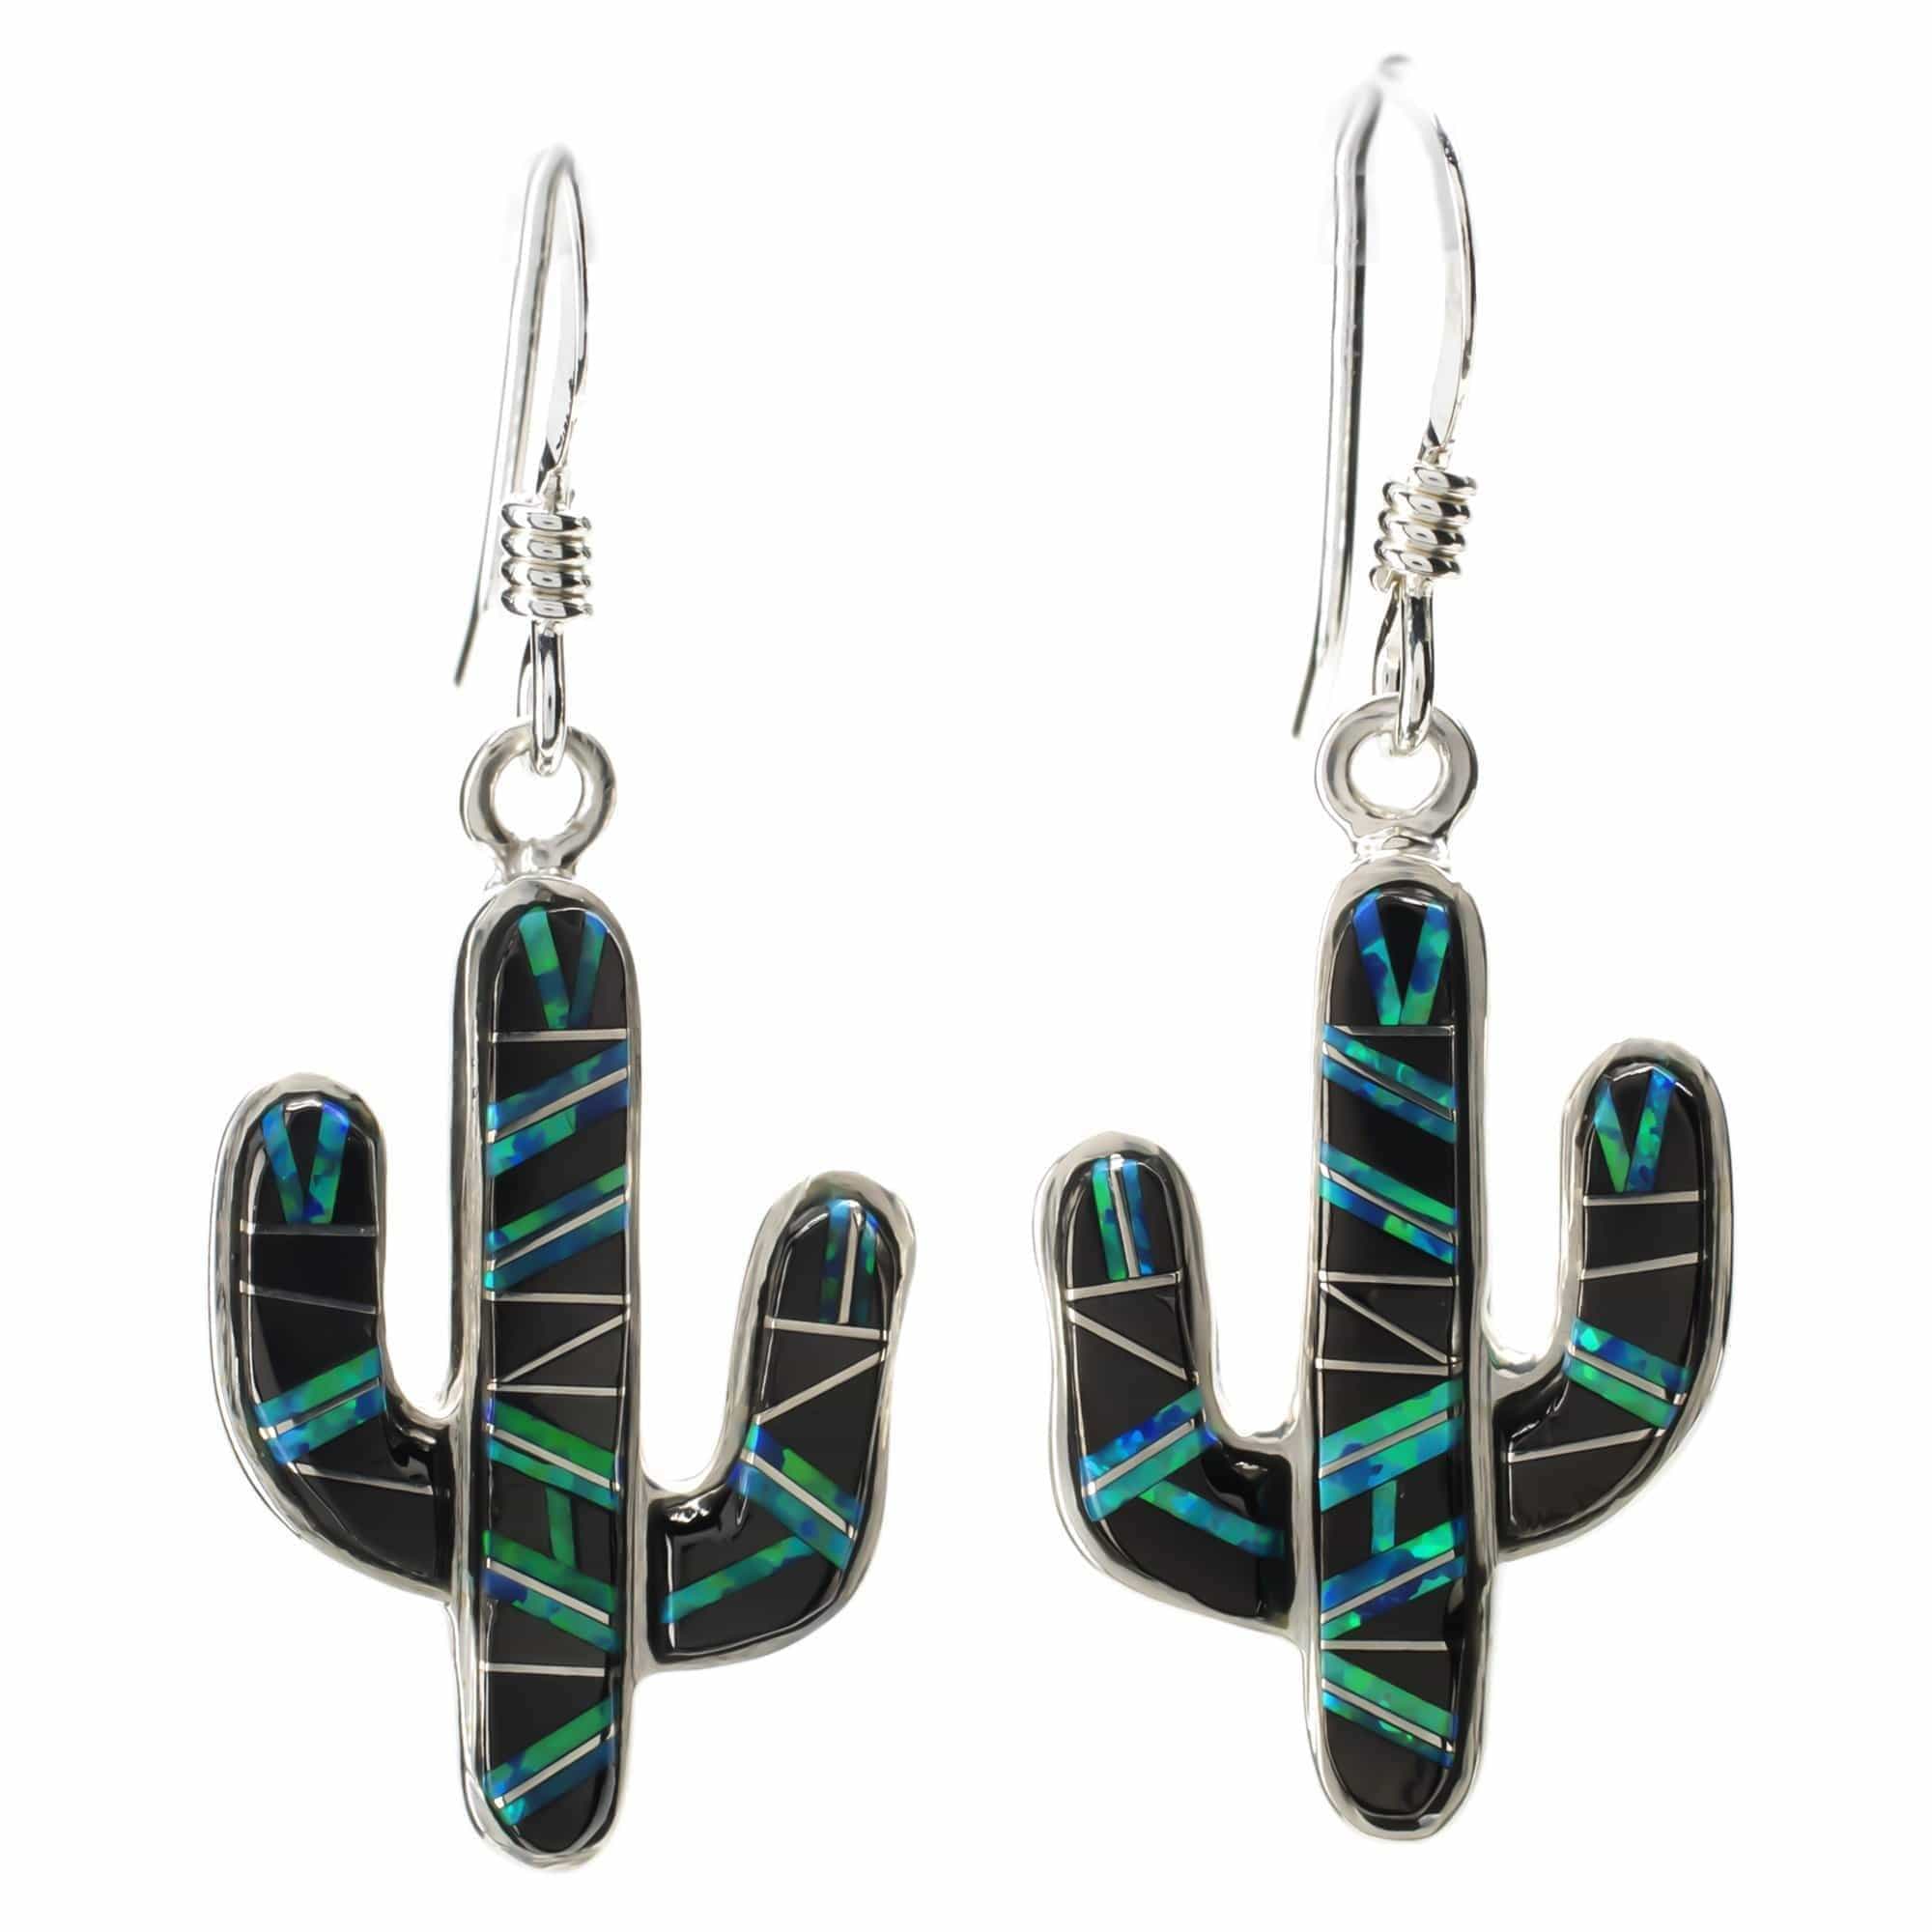 Kalifano Southwest Silver Jewelry Black Onyx Cactus 925 Sterling Silver Earring with French Hook USA Handmade with Aqua Opal Accent NME.0602.BO